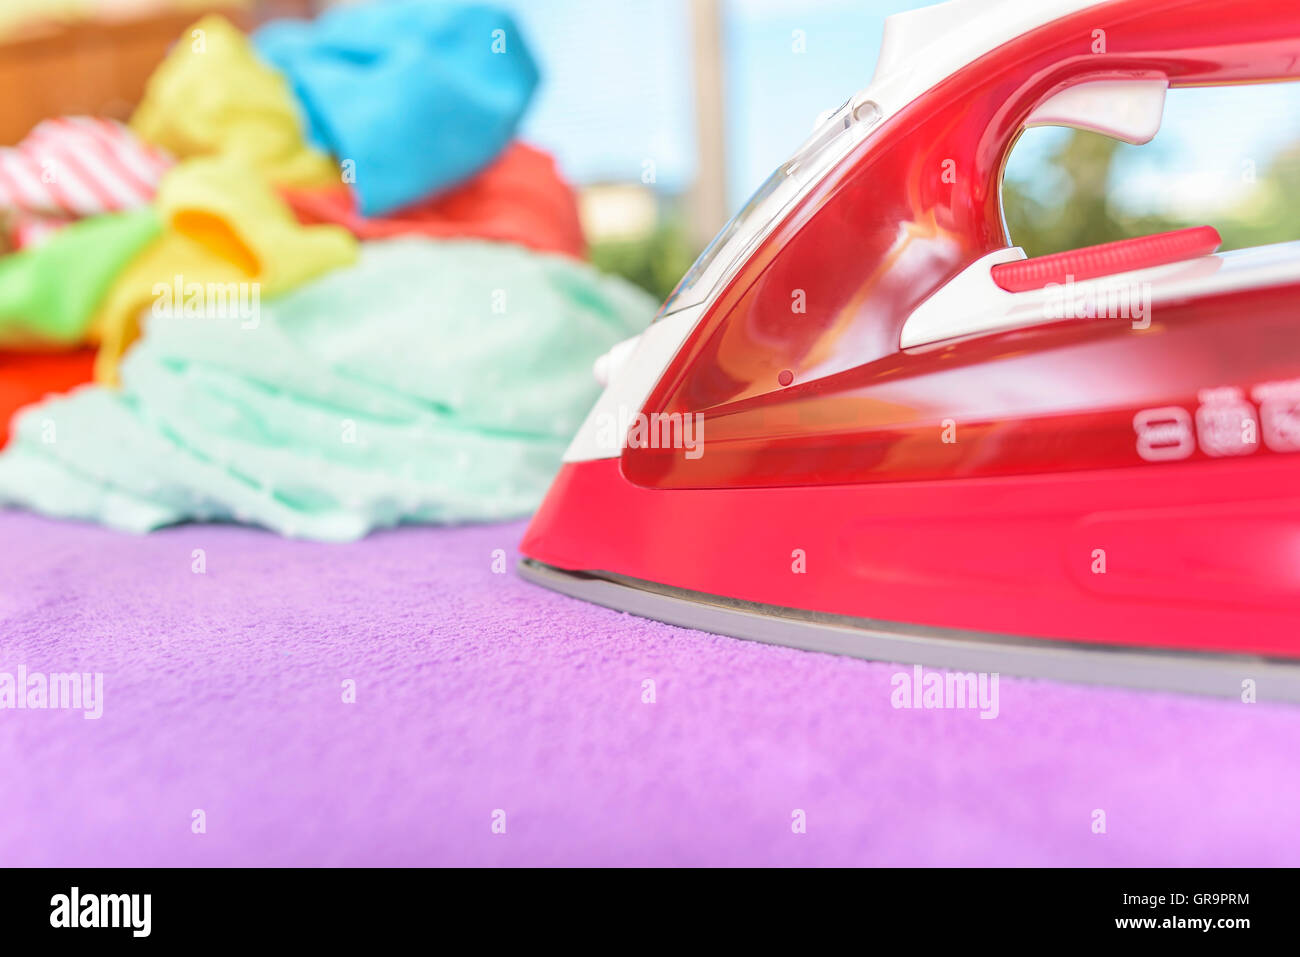 Iron and pile of clothes for ironing. Stock Photo